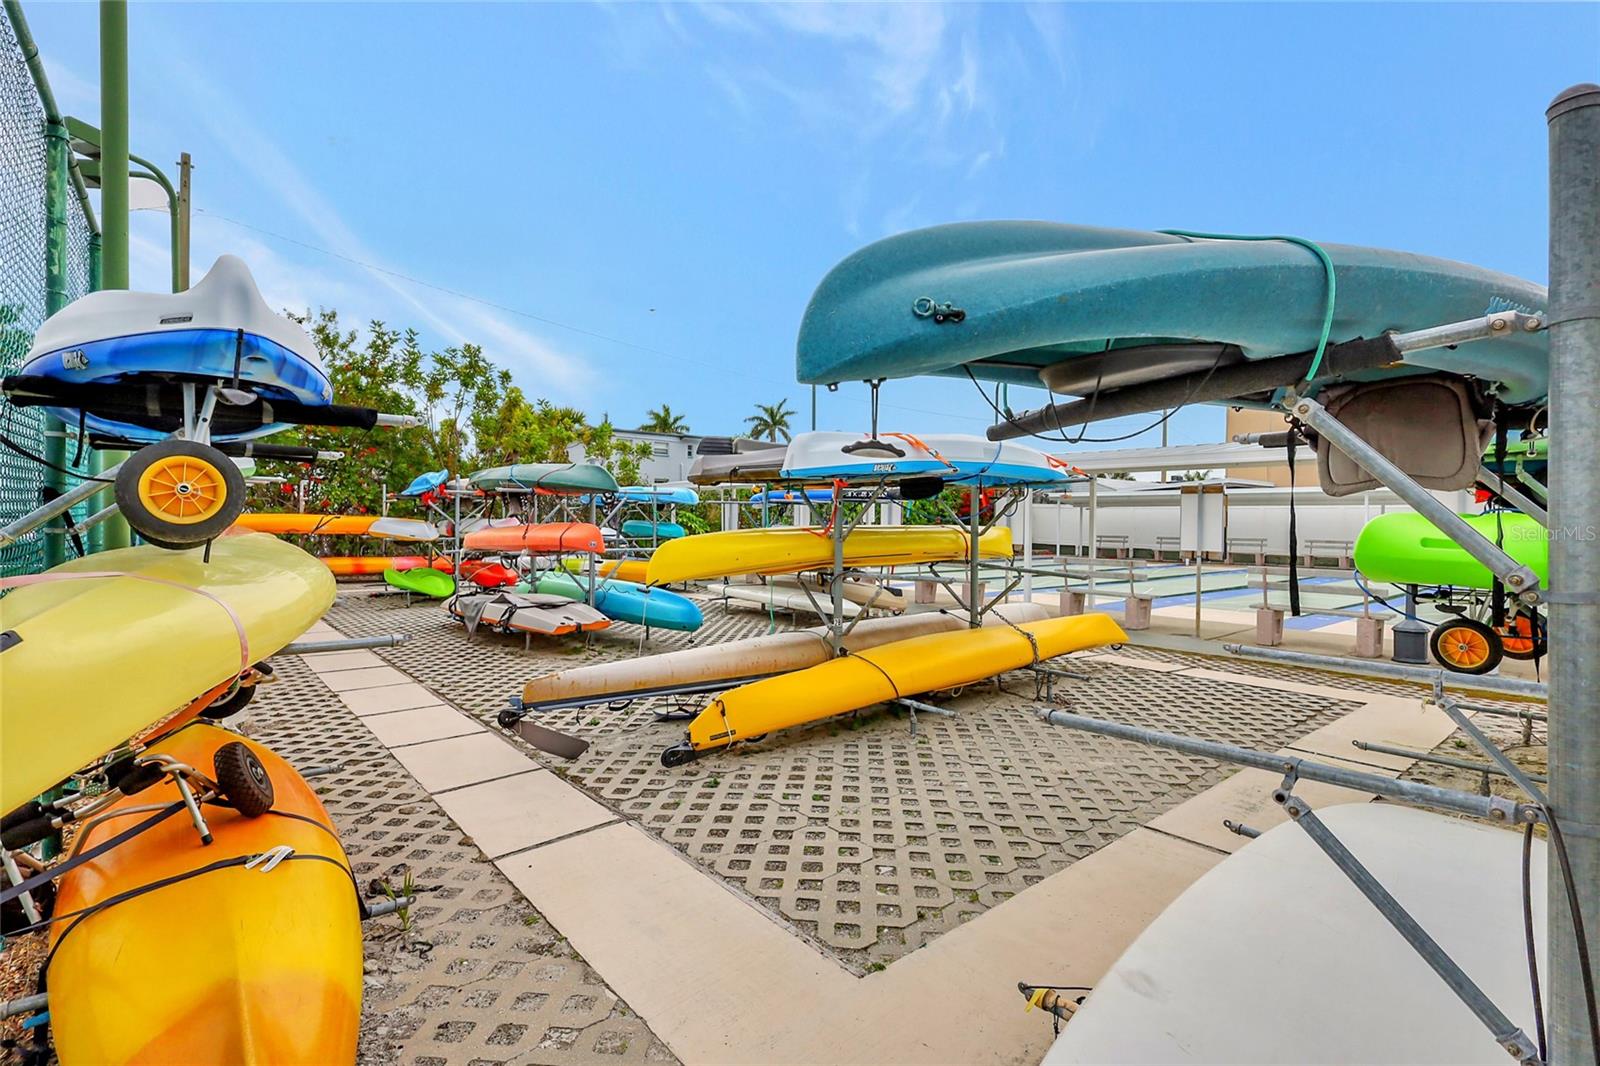 Kayak storage by the tennis courts